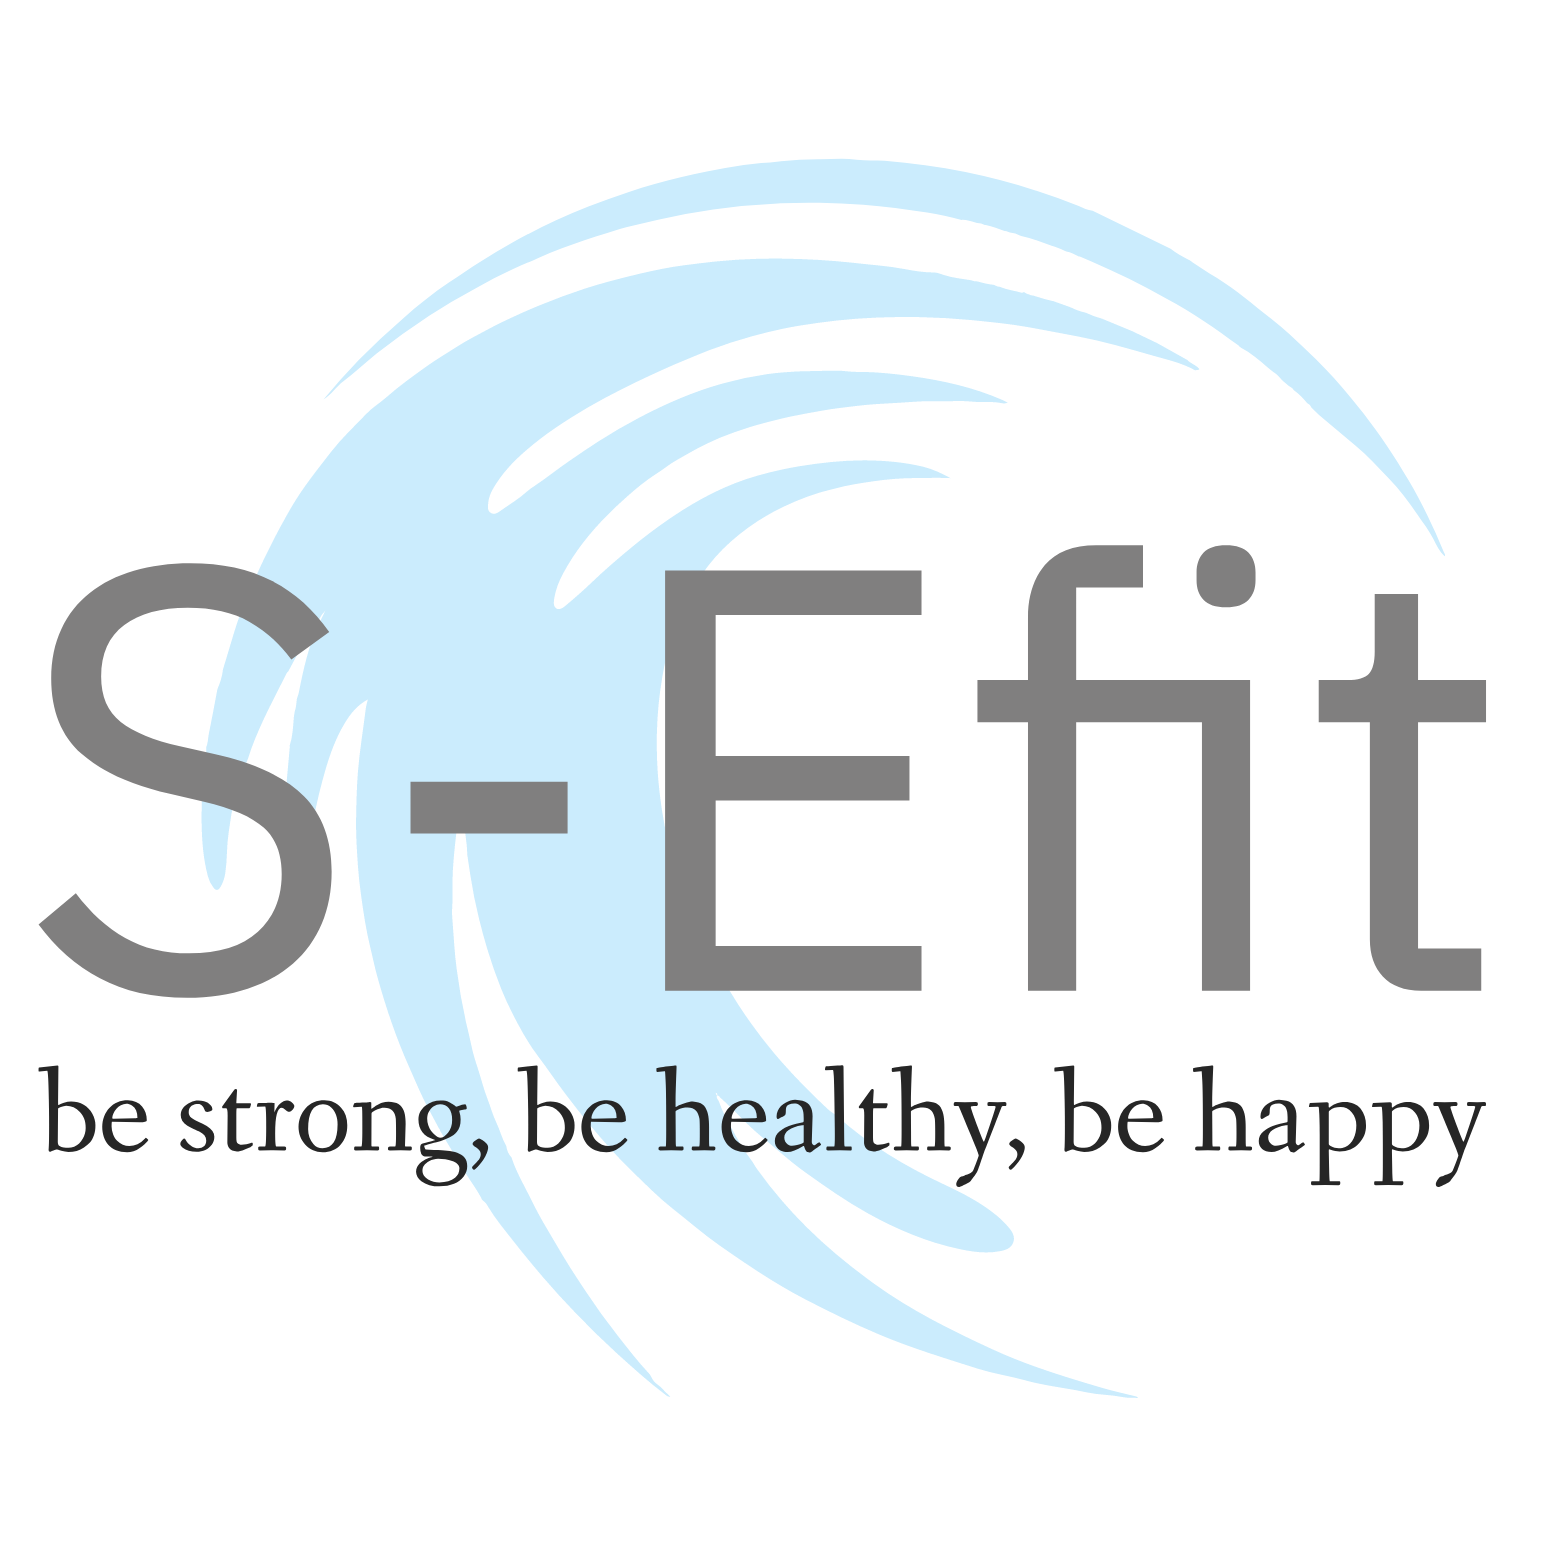 S-Efit = be strong, be healthy, be happy !